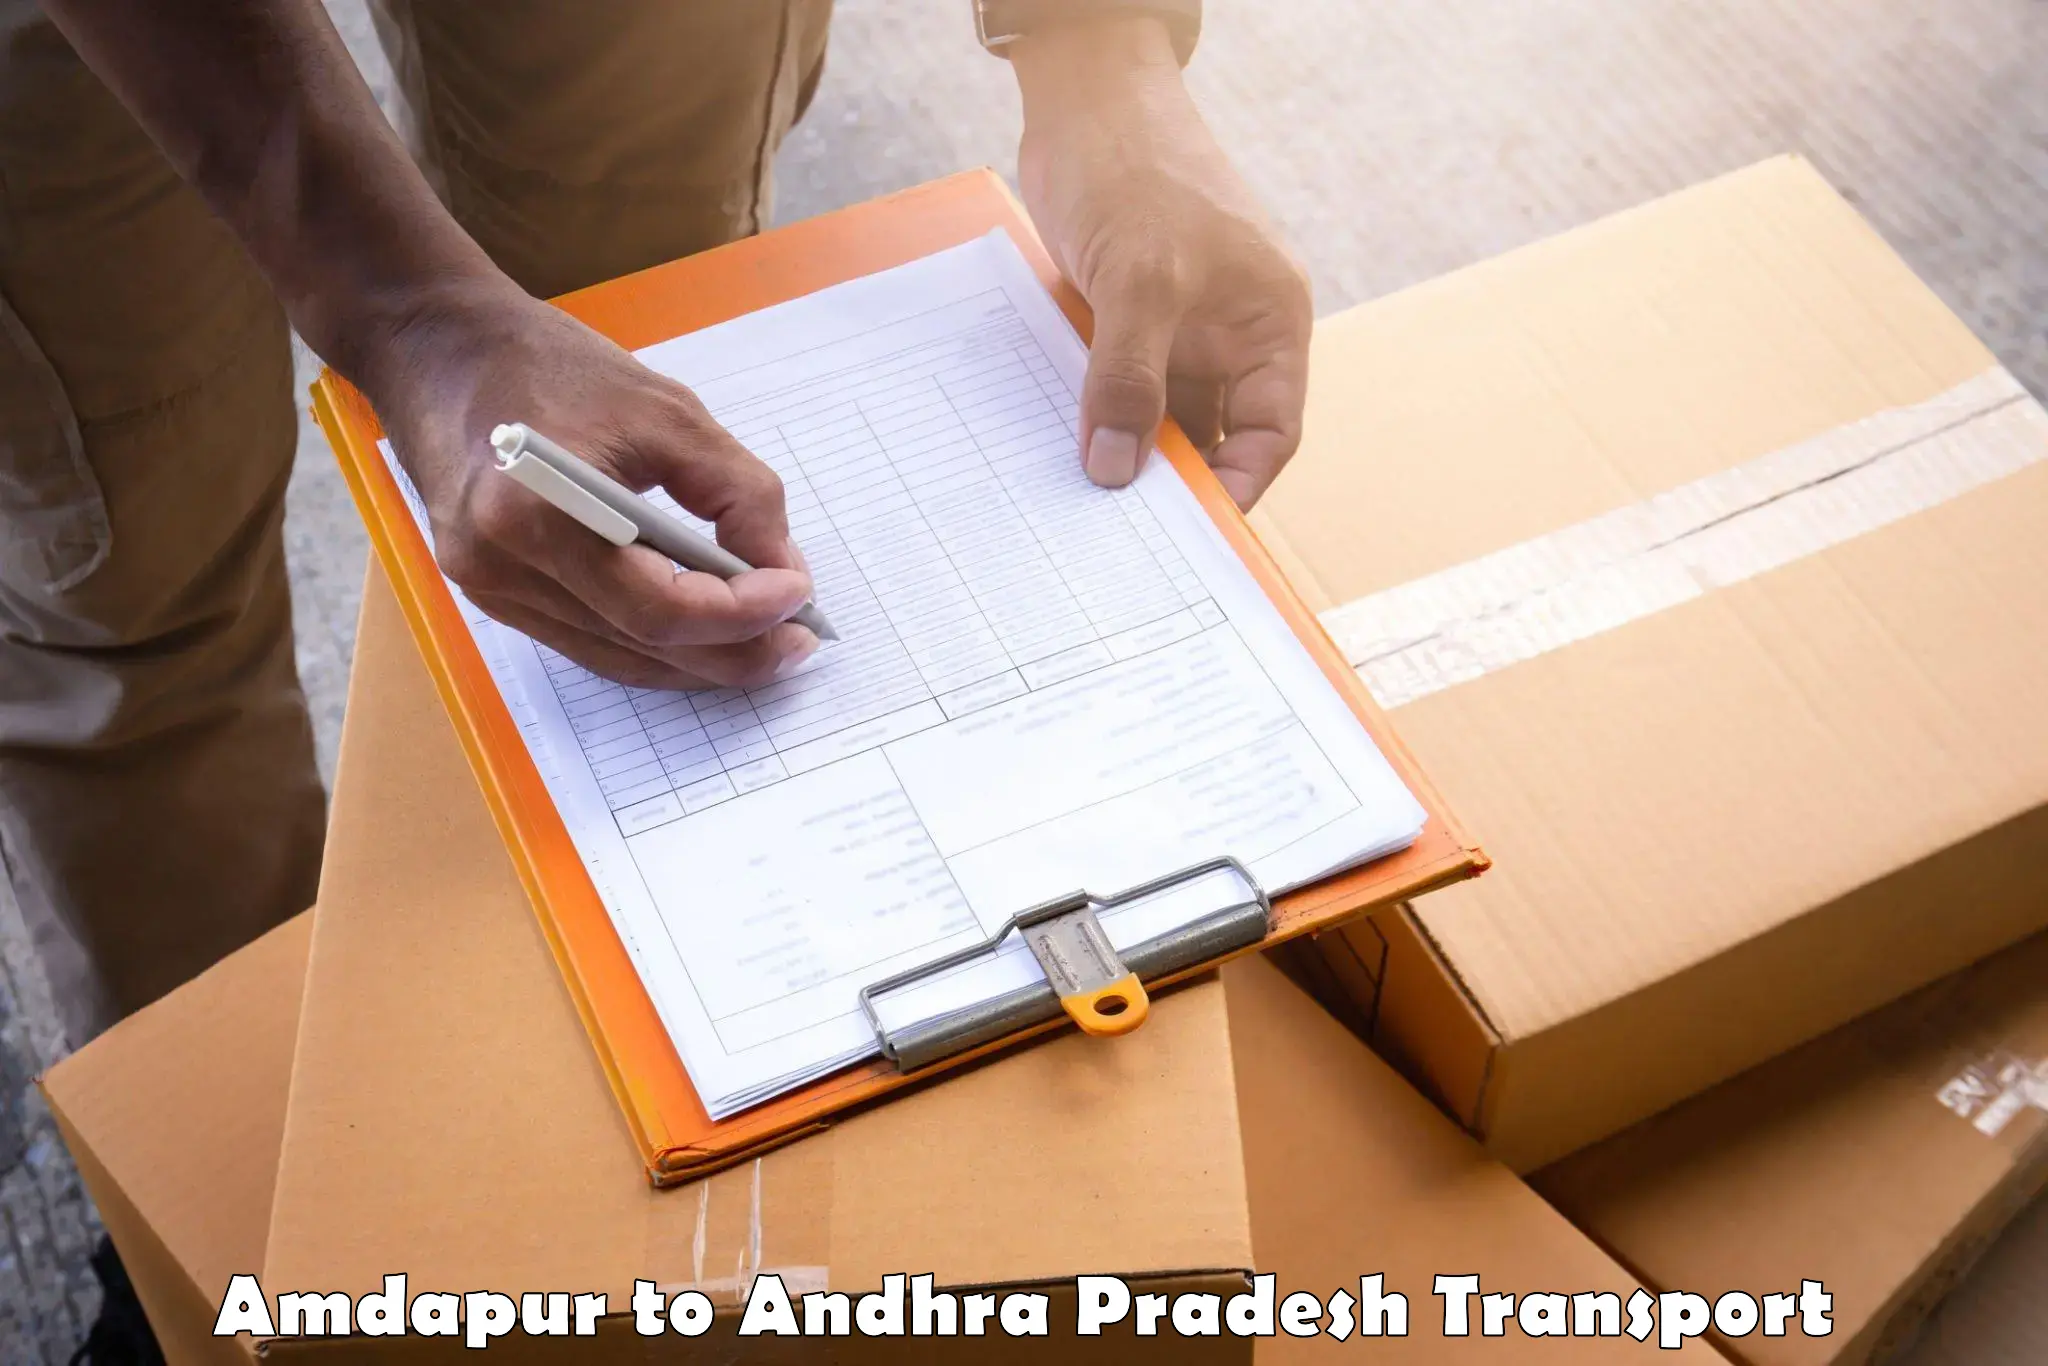 Container transport service Amdapur to Repalle